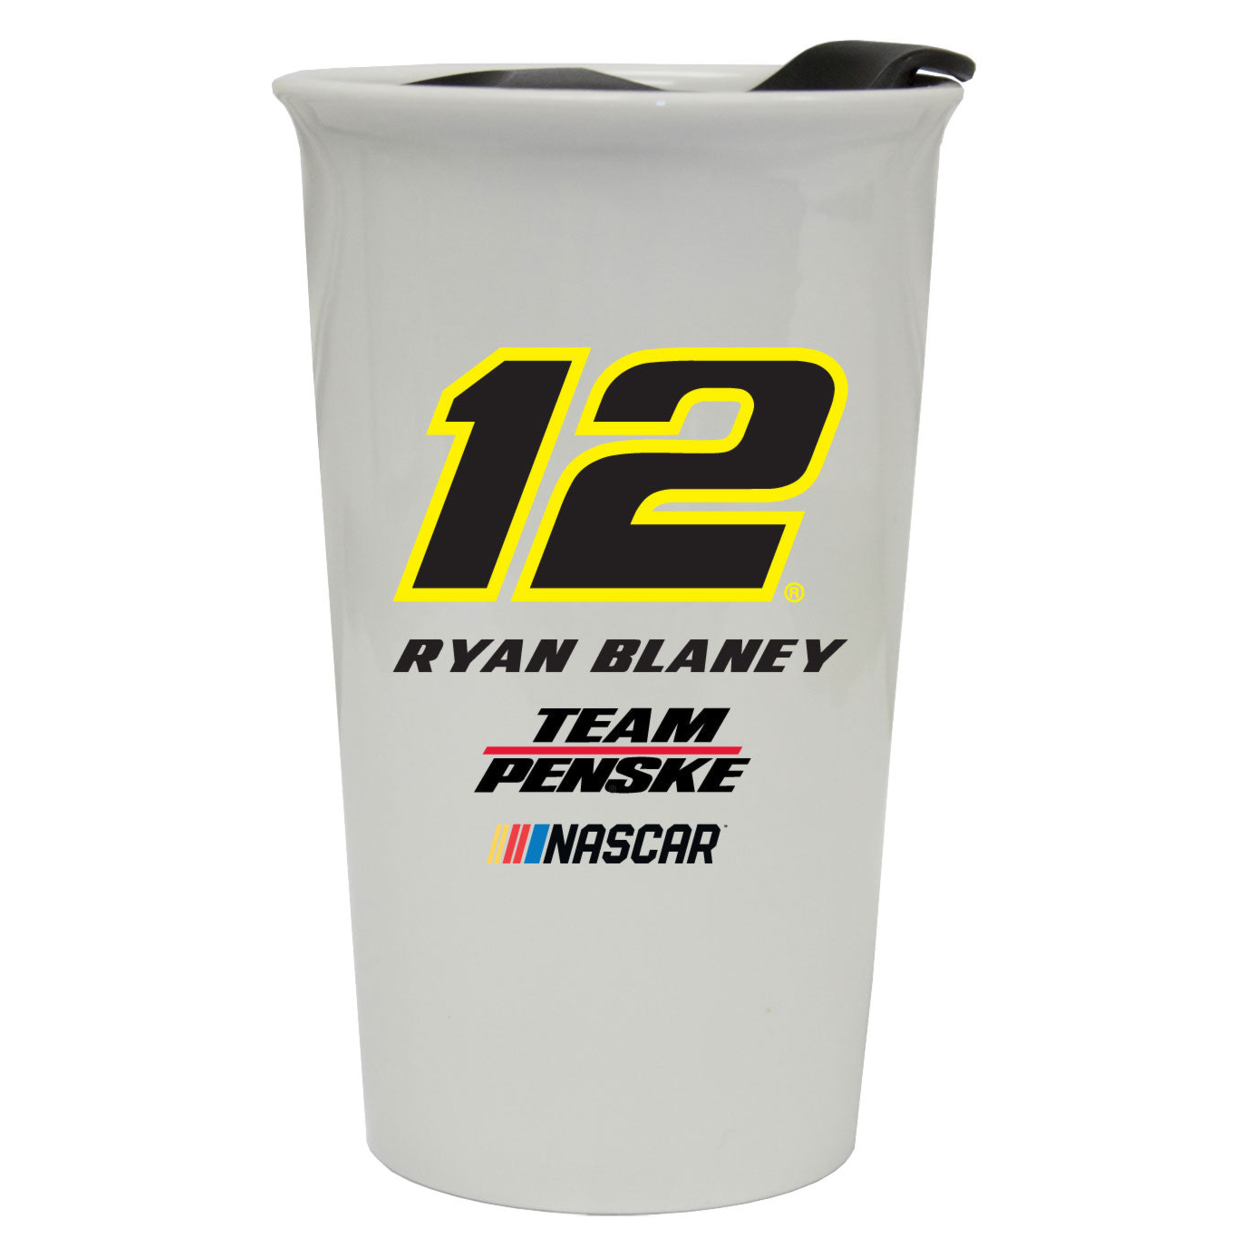 R And R Imports Ryan Blaney #12 NASCAR Double Walled Ceramic Tumbler New For 2020